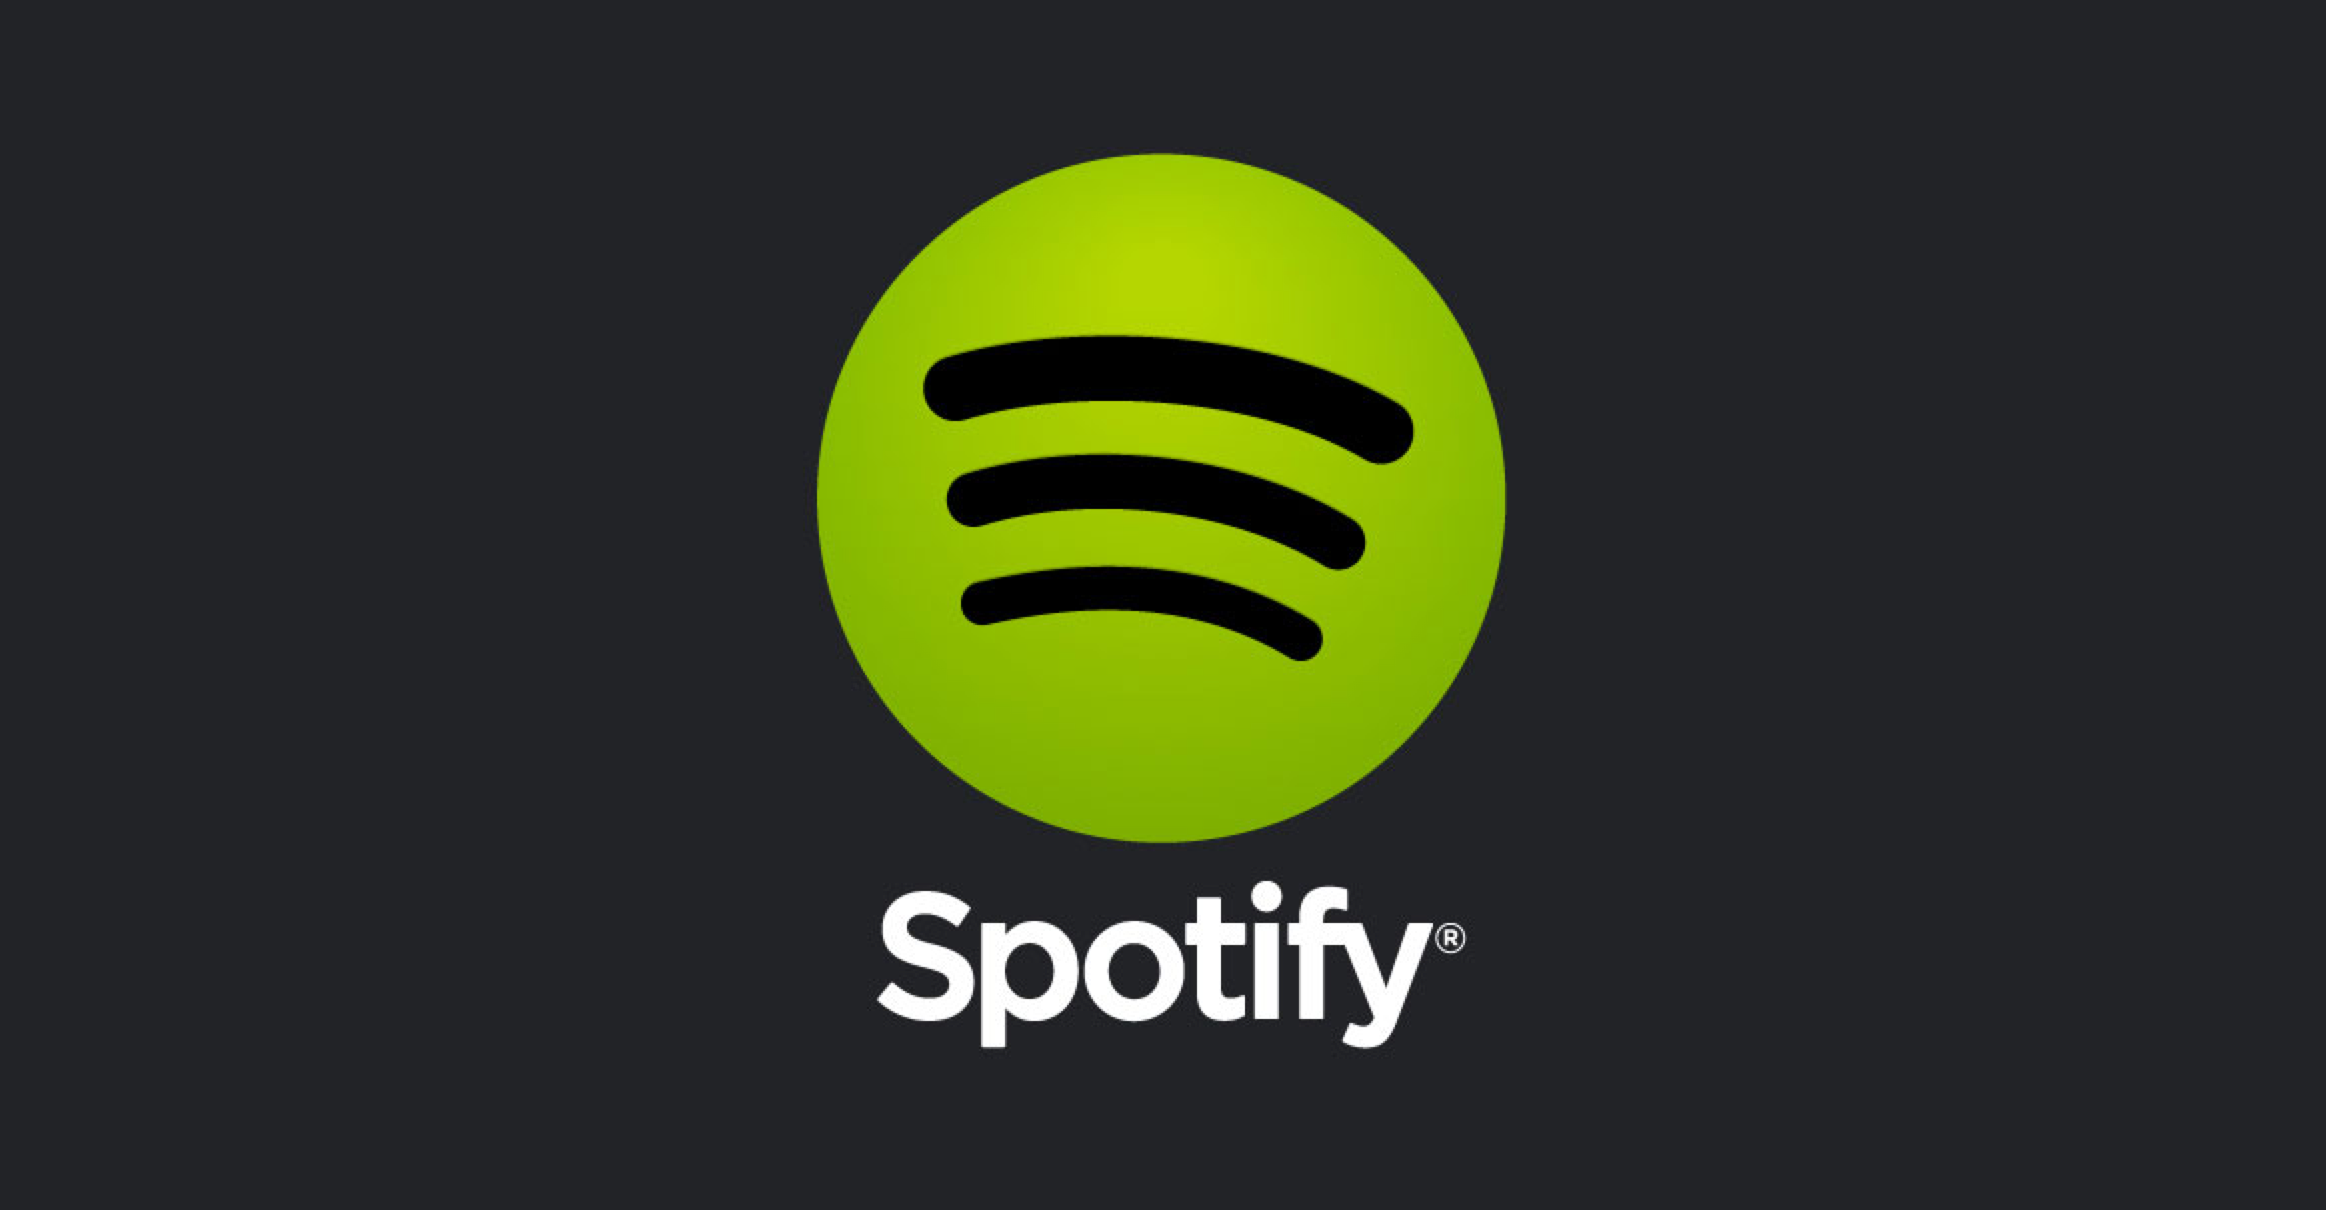 Spotify is expanding into more than 80 new markets